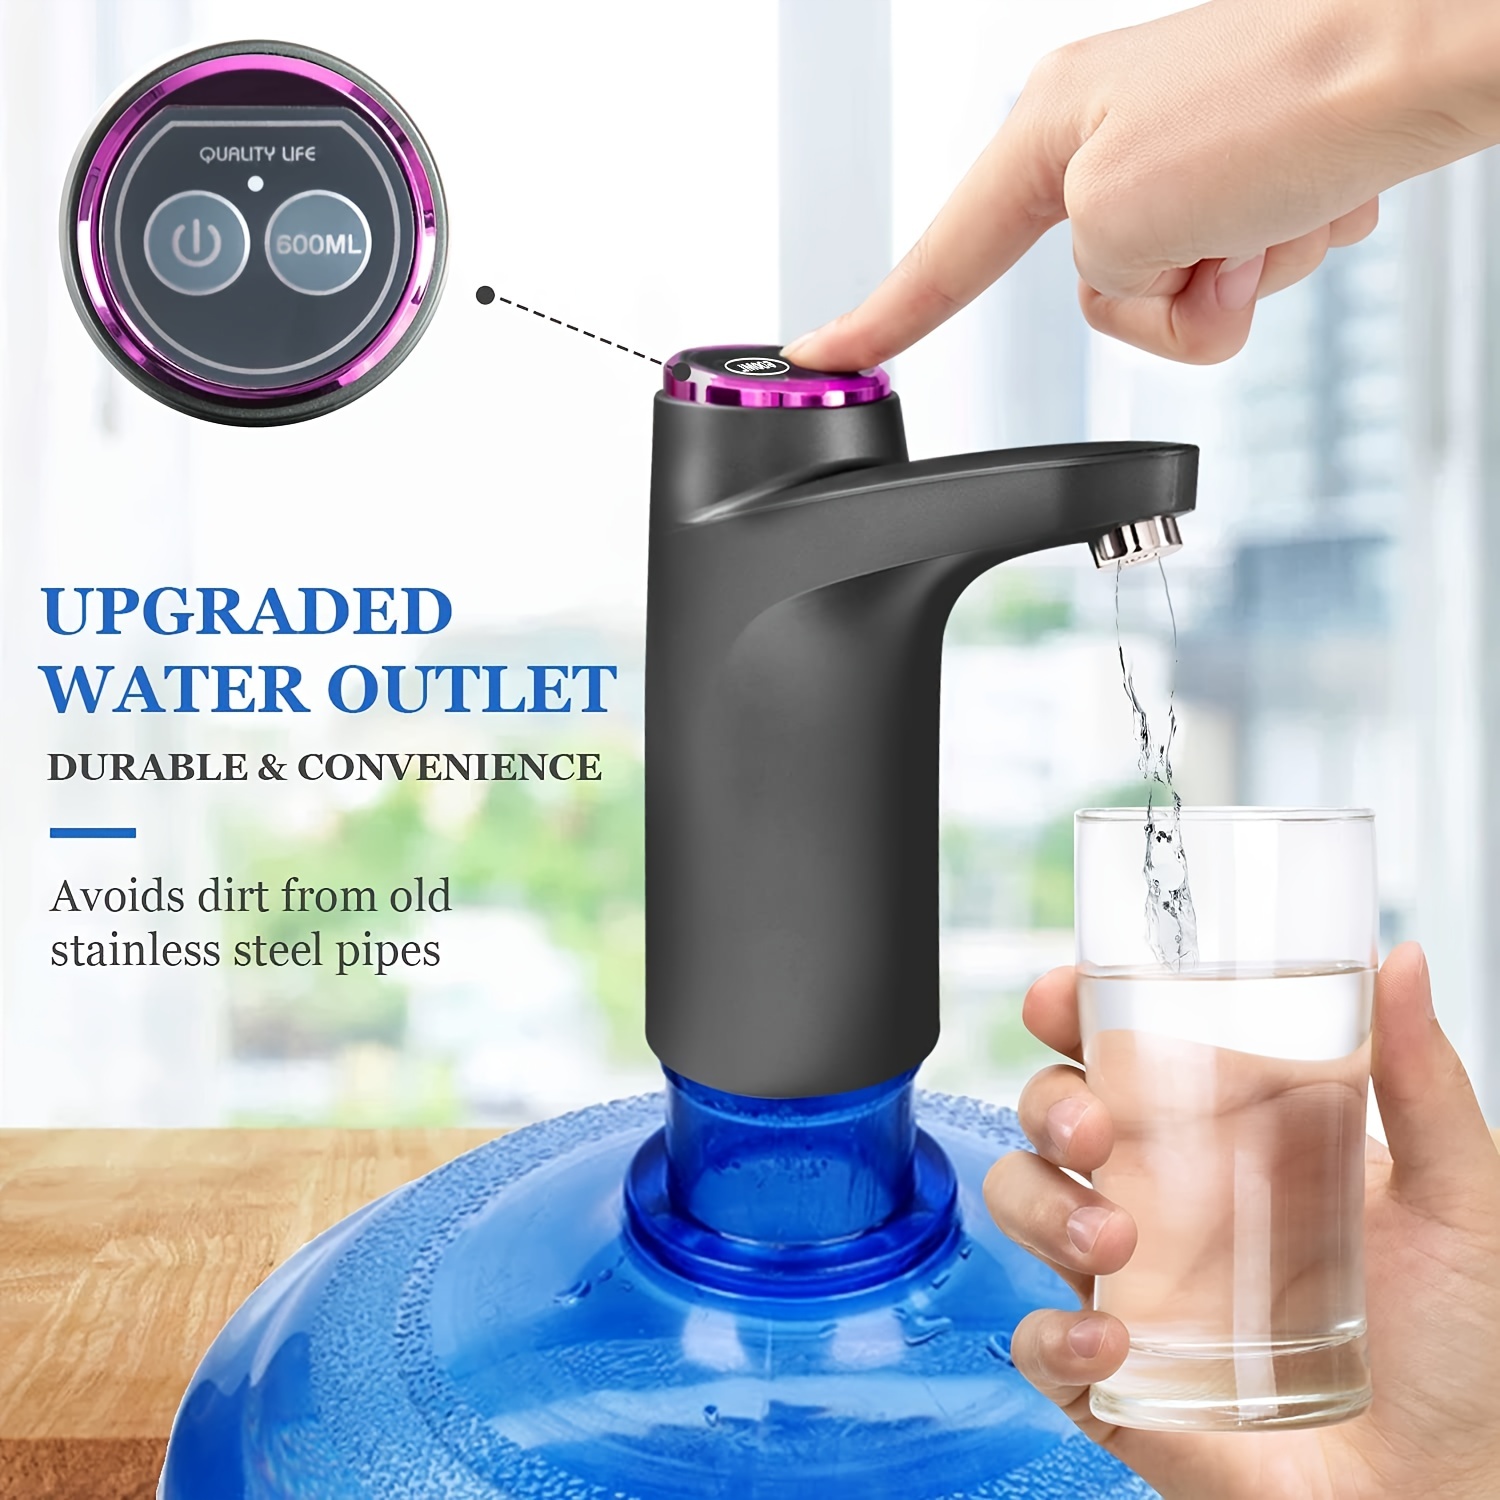 Water Bottle Pump USB Charging Automatic Electric Water Dispenser